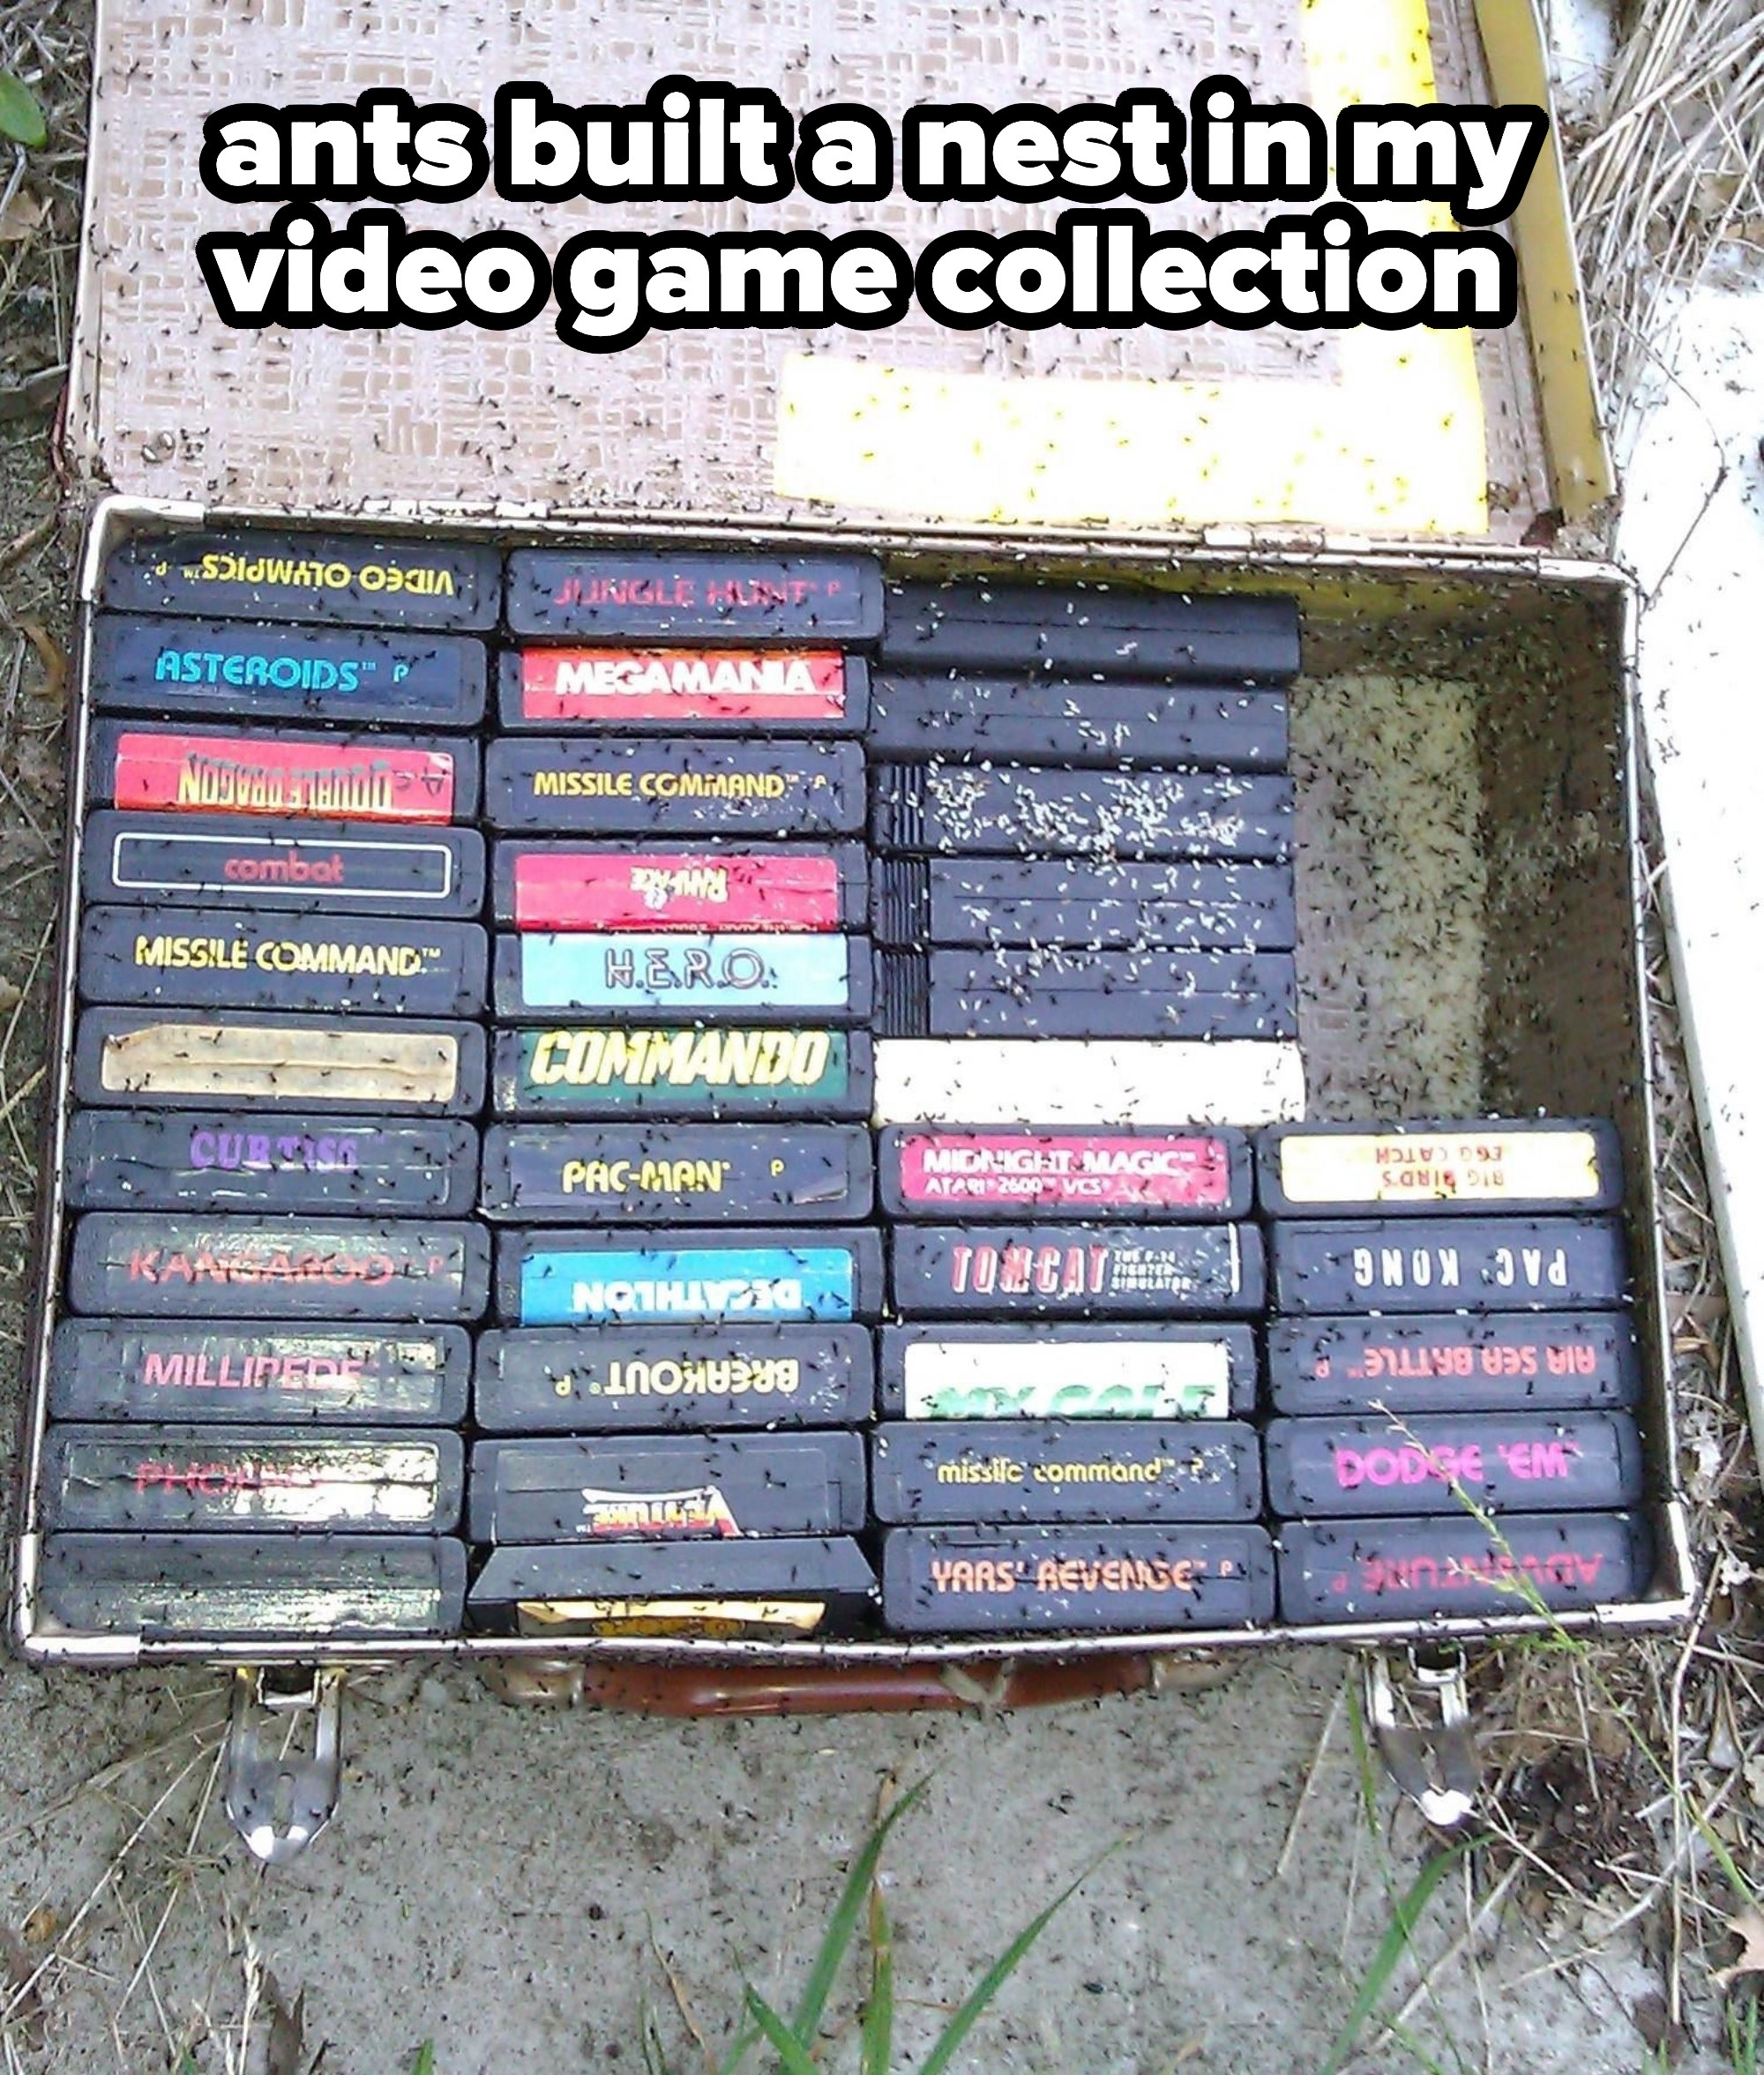 A box with video games open on the ground and infested with ants